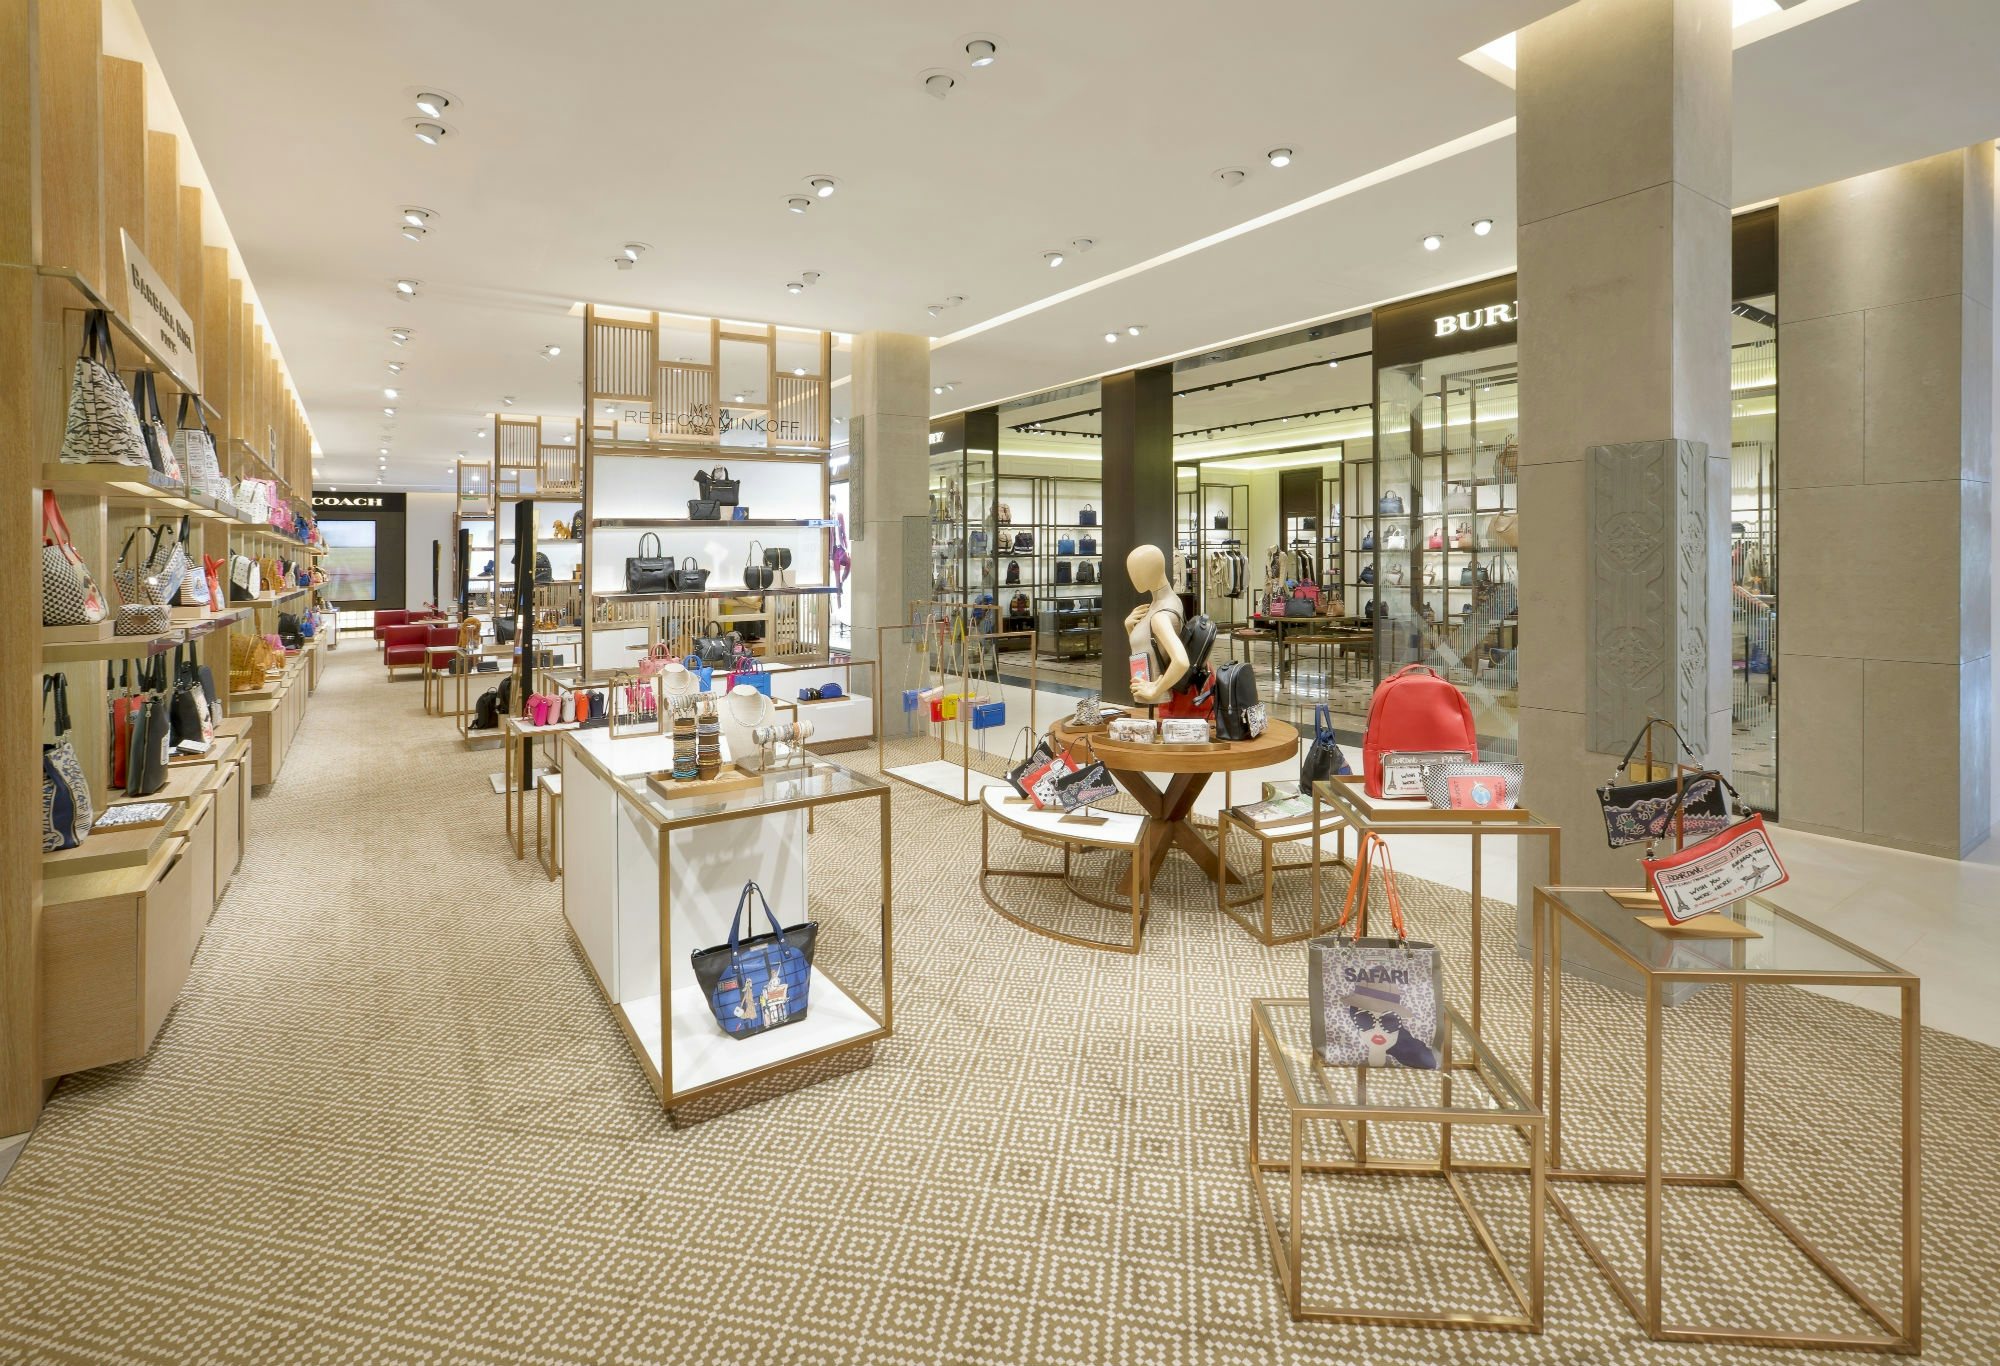 The newly launched T Galleria shopping center in Siem Reap features 170 luxury brands, spanning fashion to beauty and more. (Courtesy Photo)